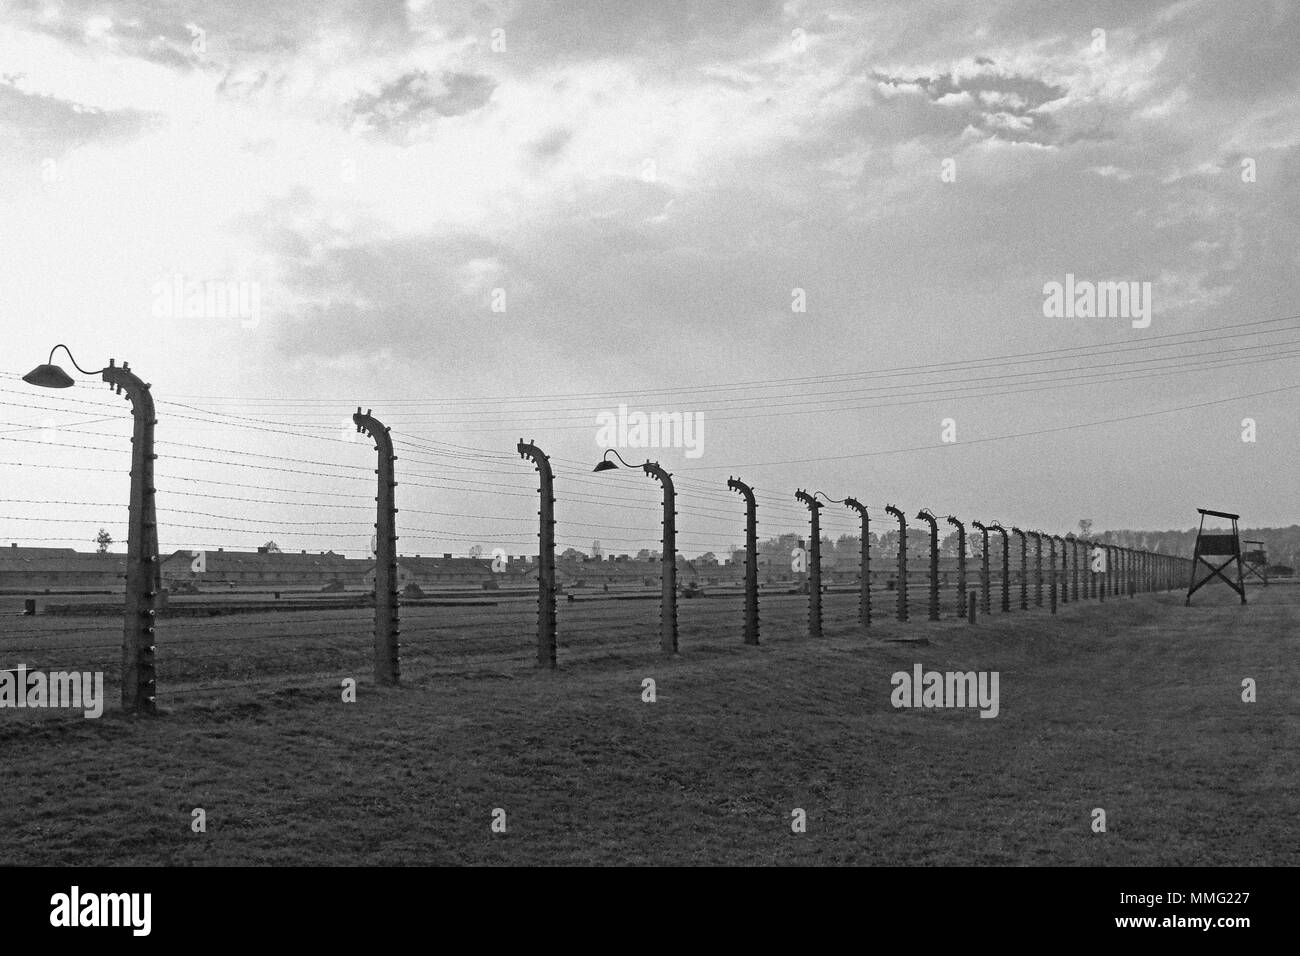 AUSCHWITZ, POLAND, OCTOBER 12, 2013: Fence and watchtower at concentration camp at Auschwitz Birkenau KZ, black and white photography with image noise effect, Poland Stock Photo